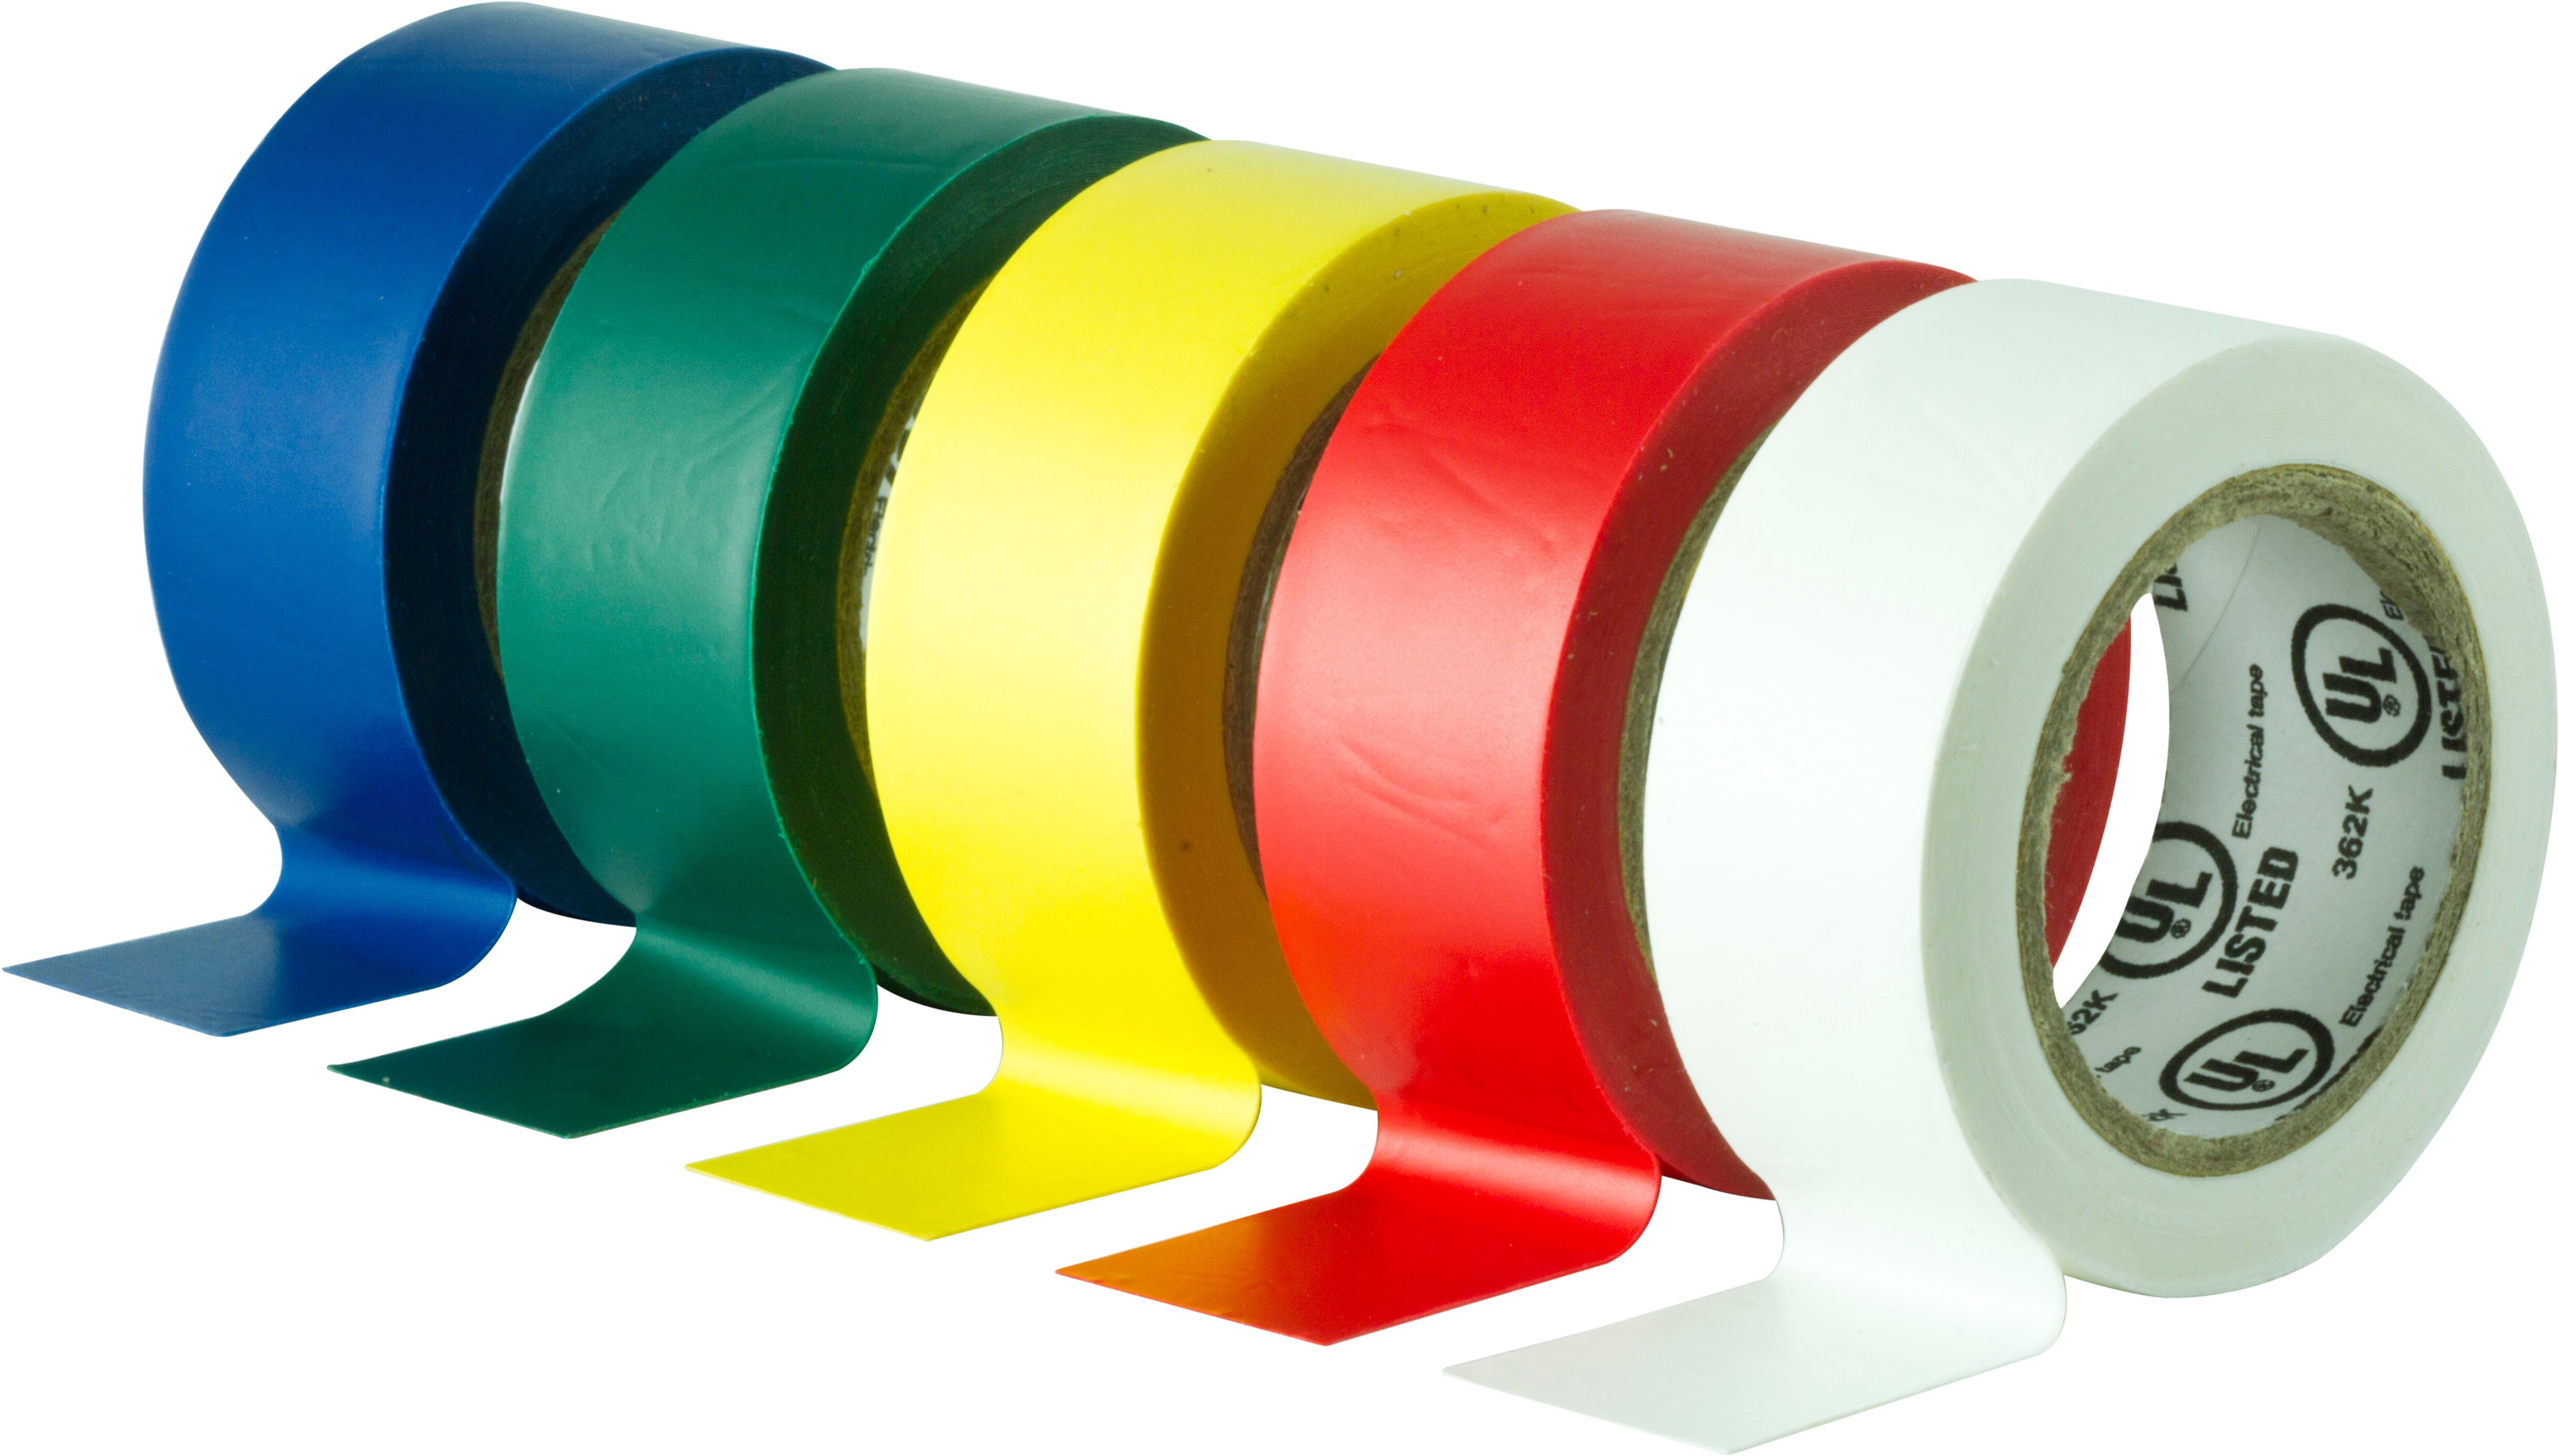 Hyper Tough Assorted Color Electrical Tape, 14ft length, Indoor, 5 Pack, 3/4in, 0.26lbs - 35831 - image 1 of 5